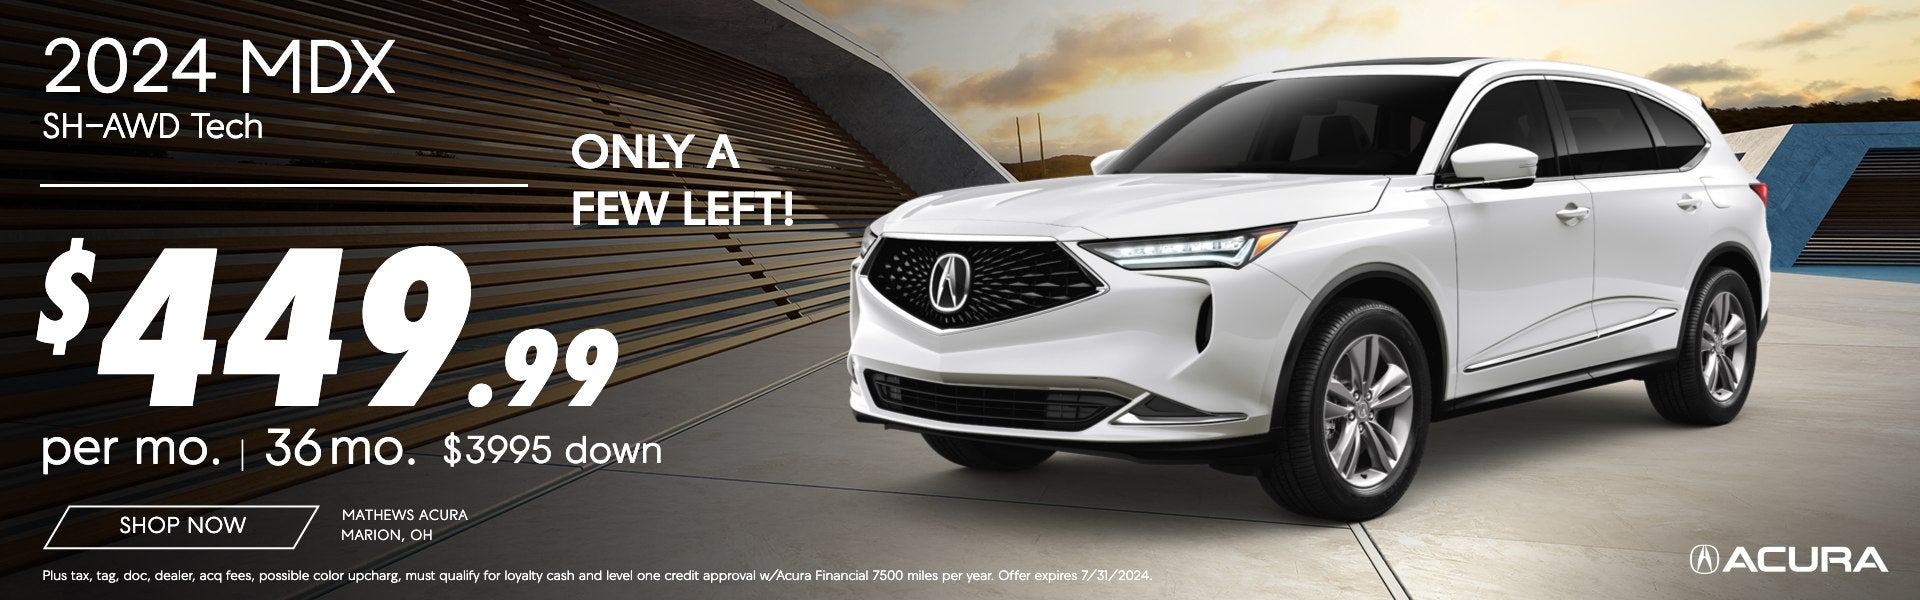 Acura MDX Lease Special